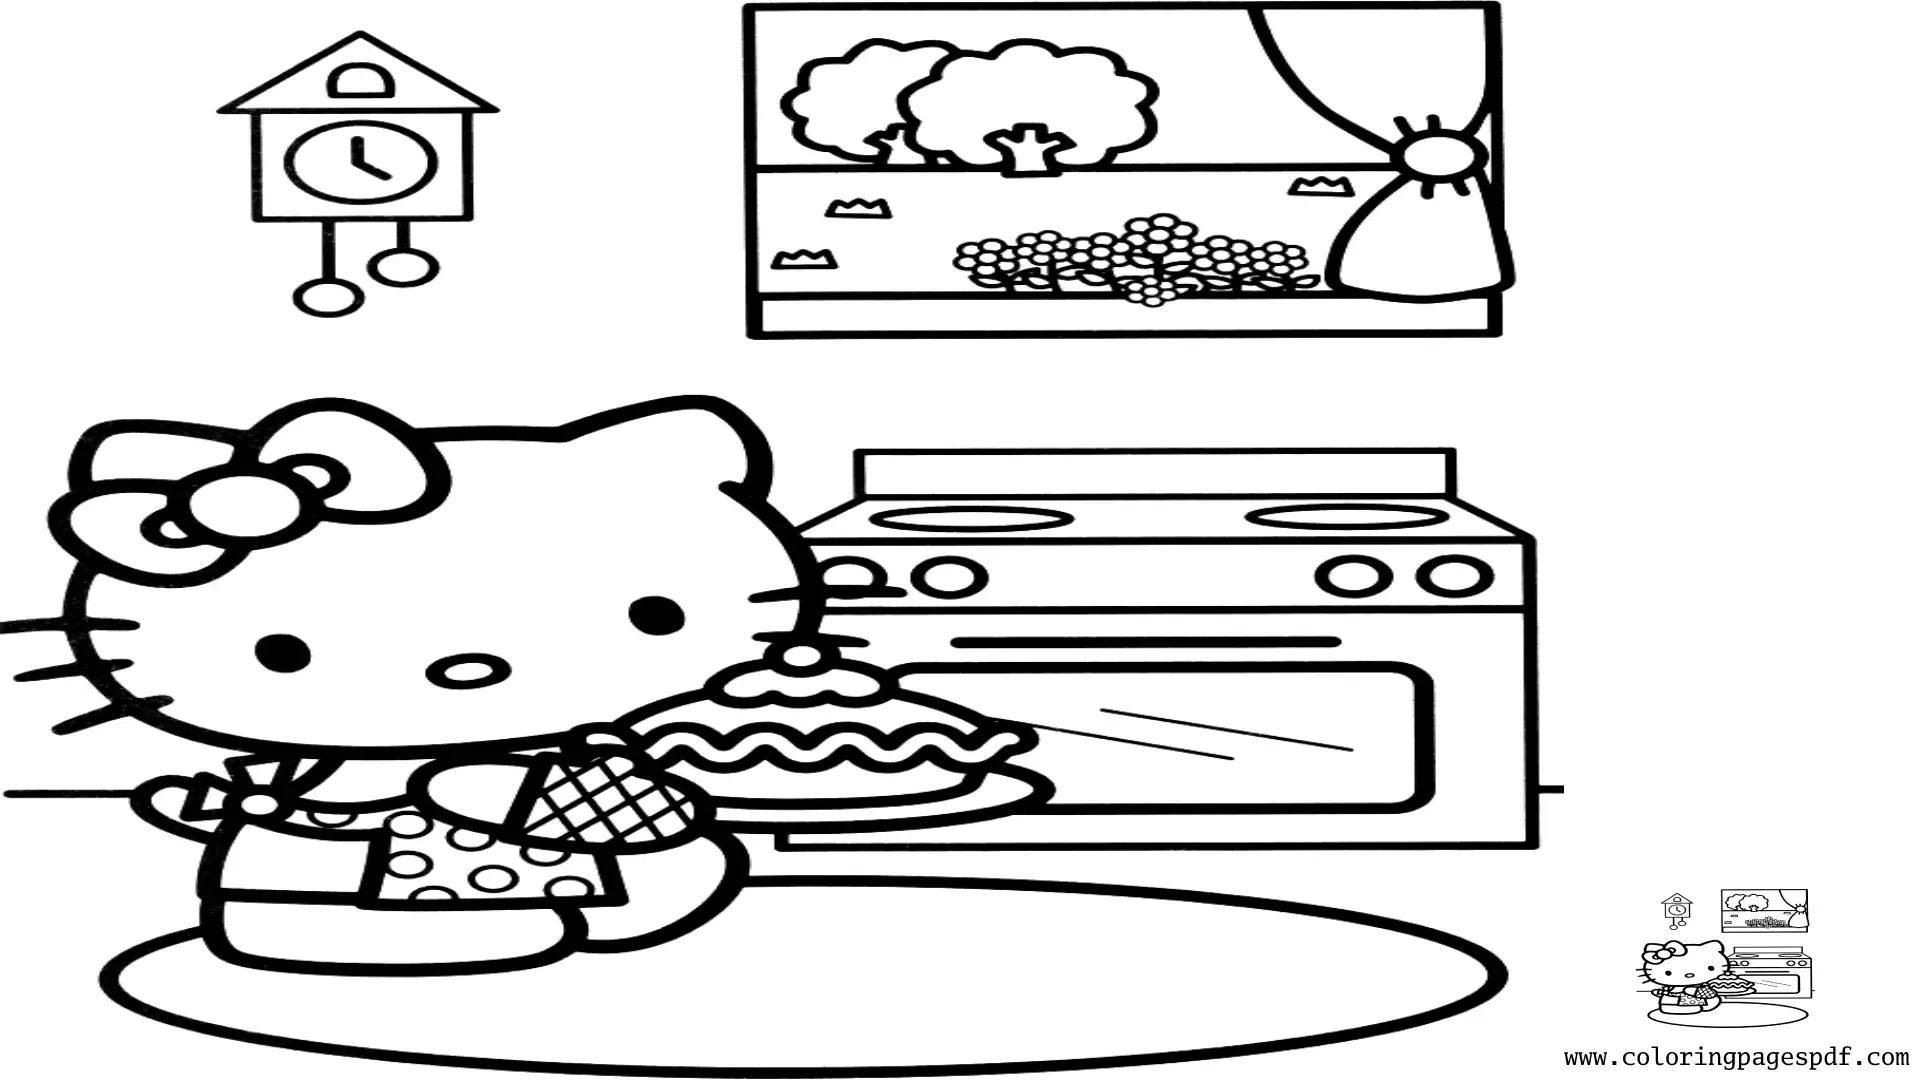 Coloring Page Of Hello Kitty Cooking A Cake